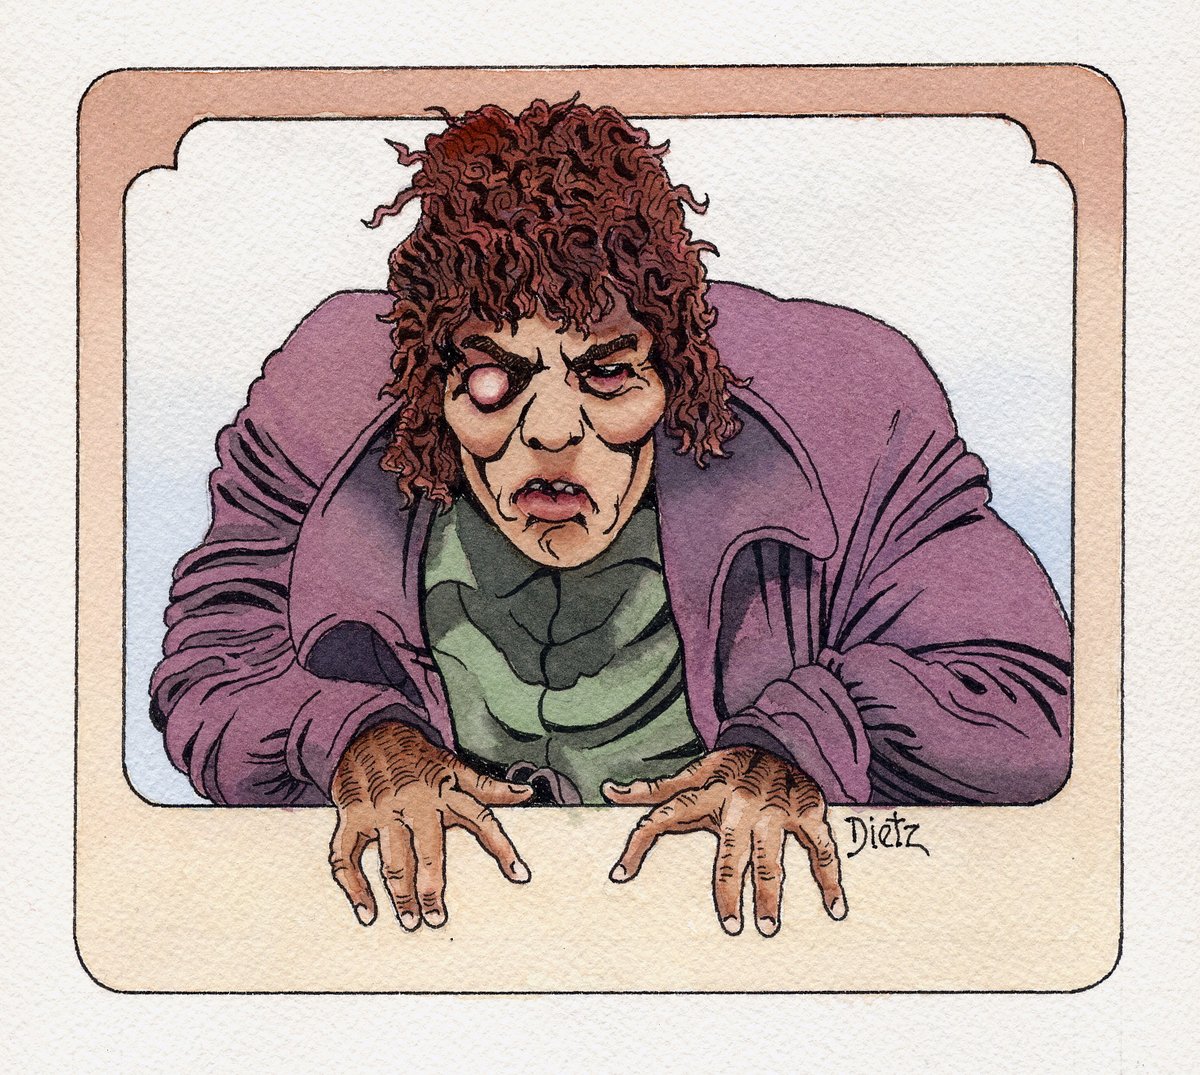 Random artwork post: Pen and ink/watercolor painting of Lon Chaney as Quasimodo, THE HUNCHBACK OF NOTRE DAME. #sketchythings #lonchaney #thehunchbackofnotredame #silentmovie #notamonster #watercolor #horrorcommunity #horrorfam